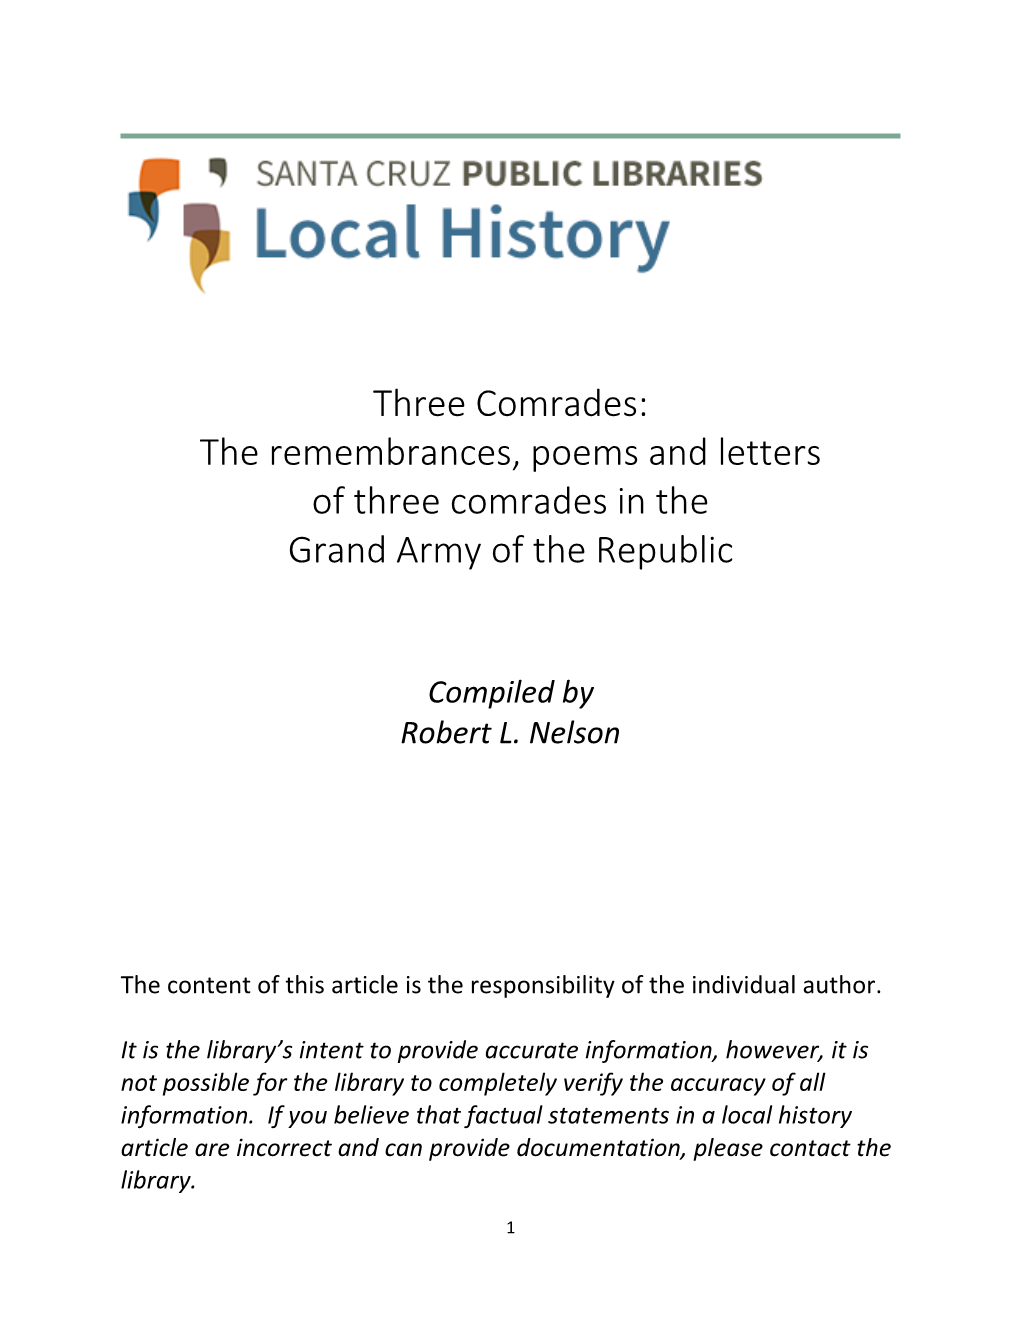 The Remembrances, Poems and Letters of Three Comrades in the Grand Army of the Republic